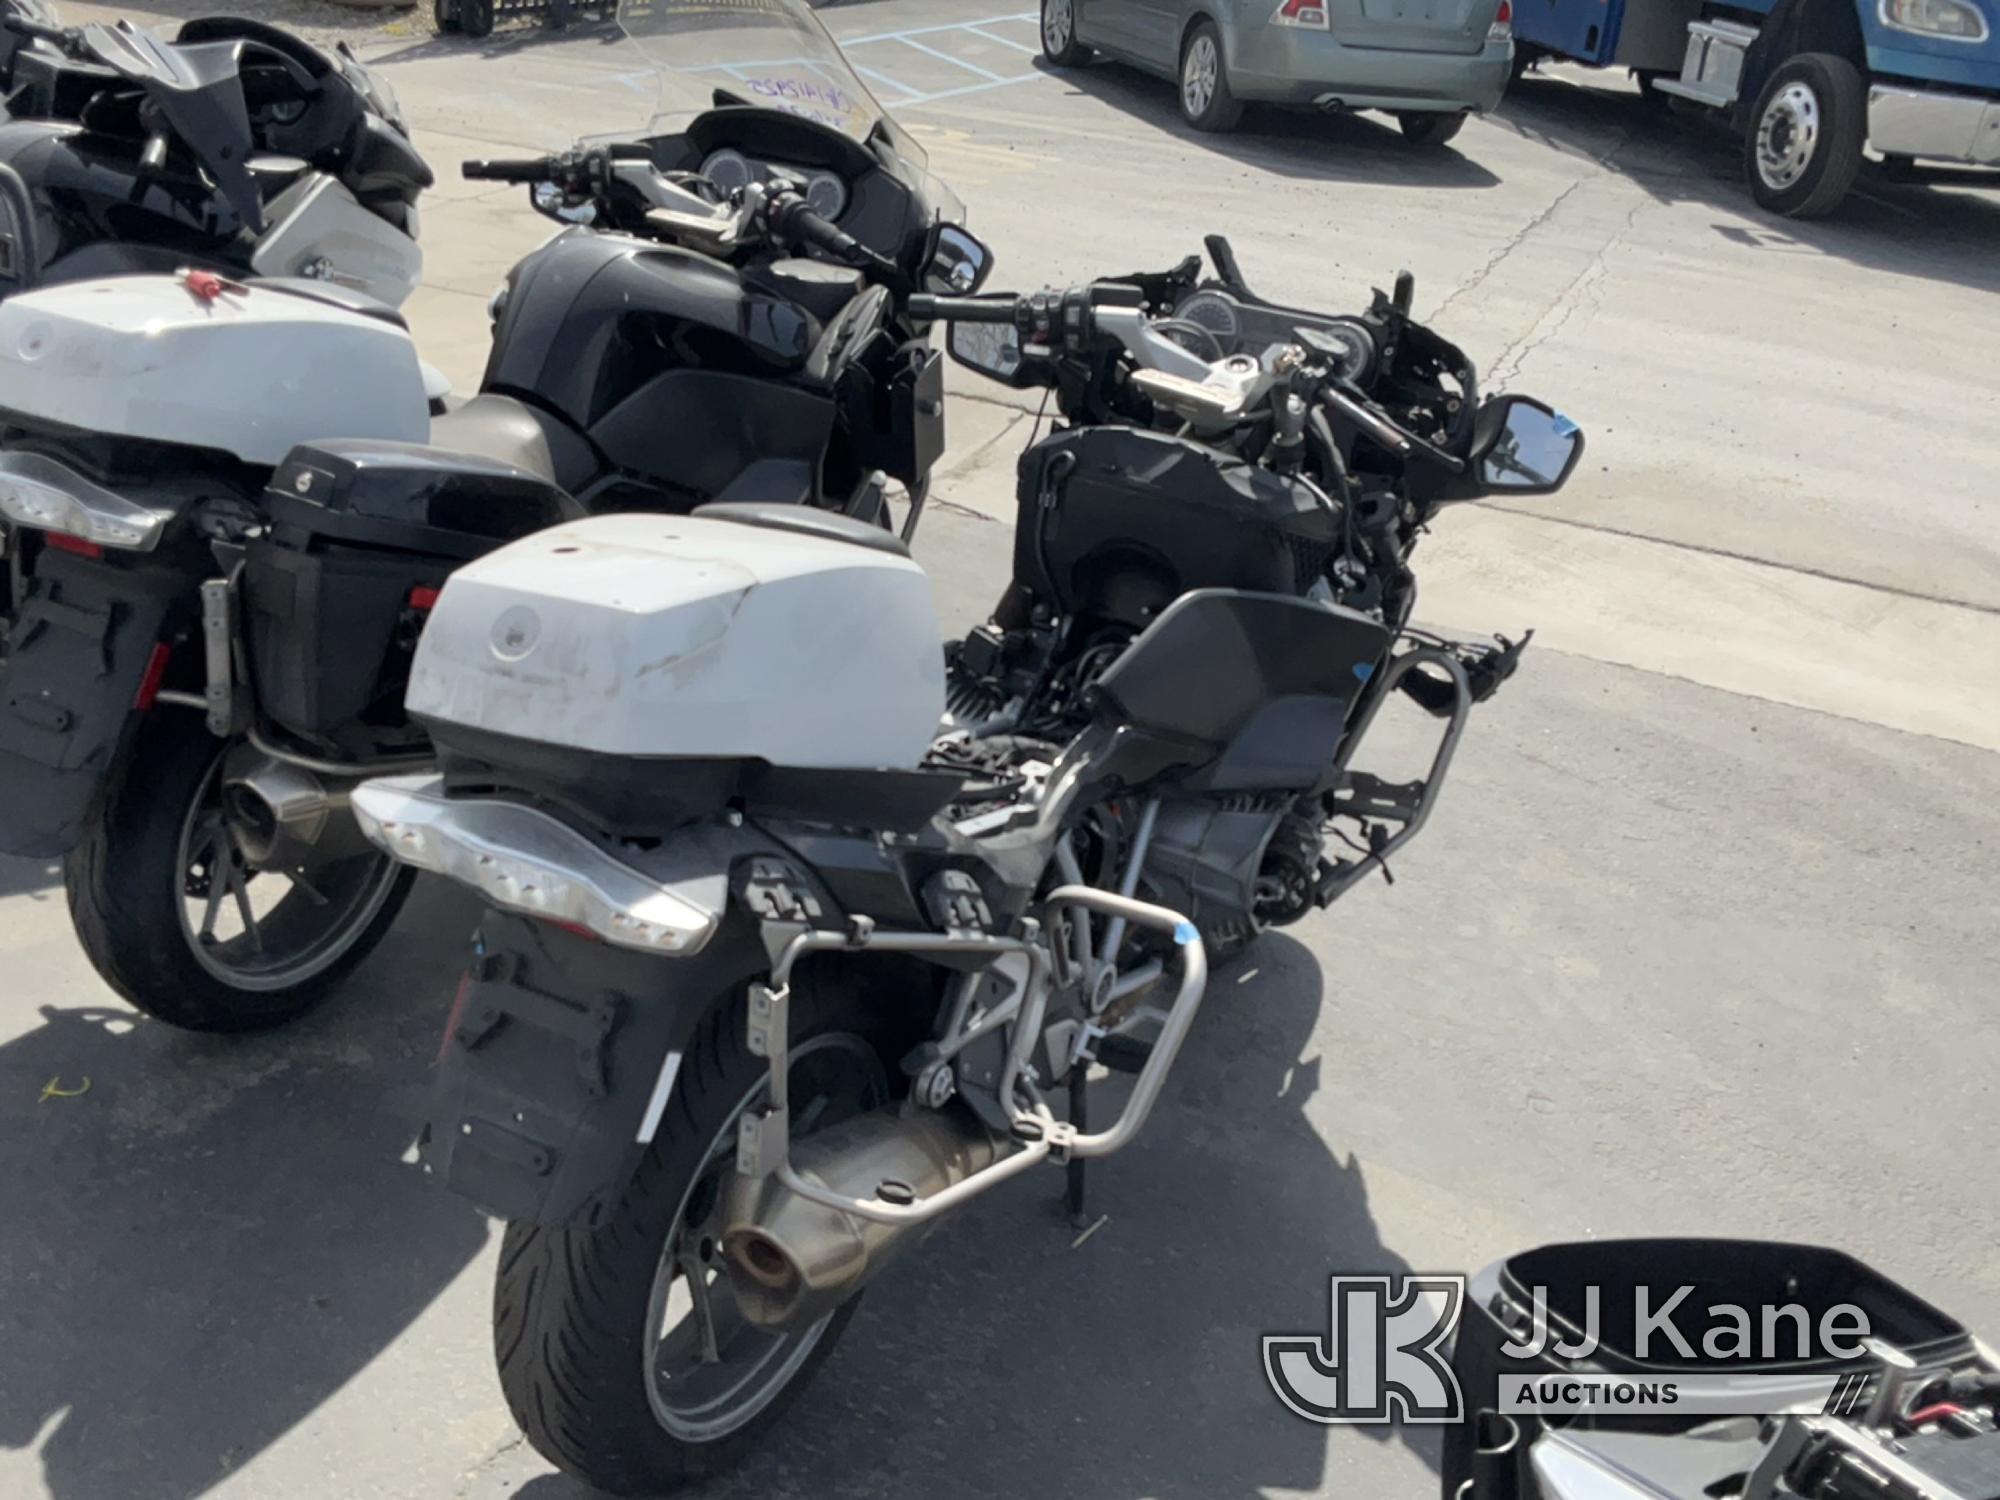 (Jurupa Valley, CA) 2018 BMW R1200RT Motorcycle Not Running , Stripped Of Parts